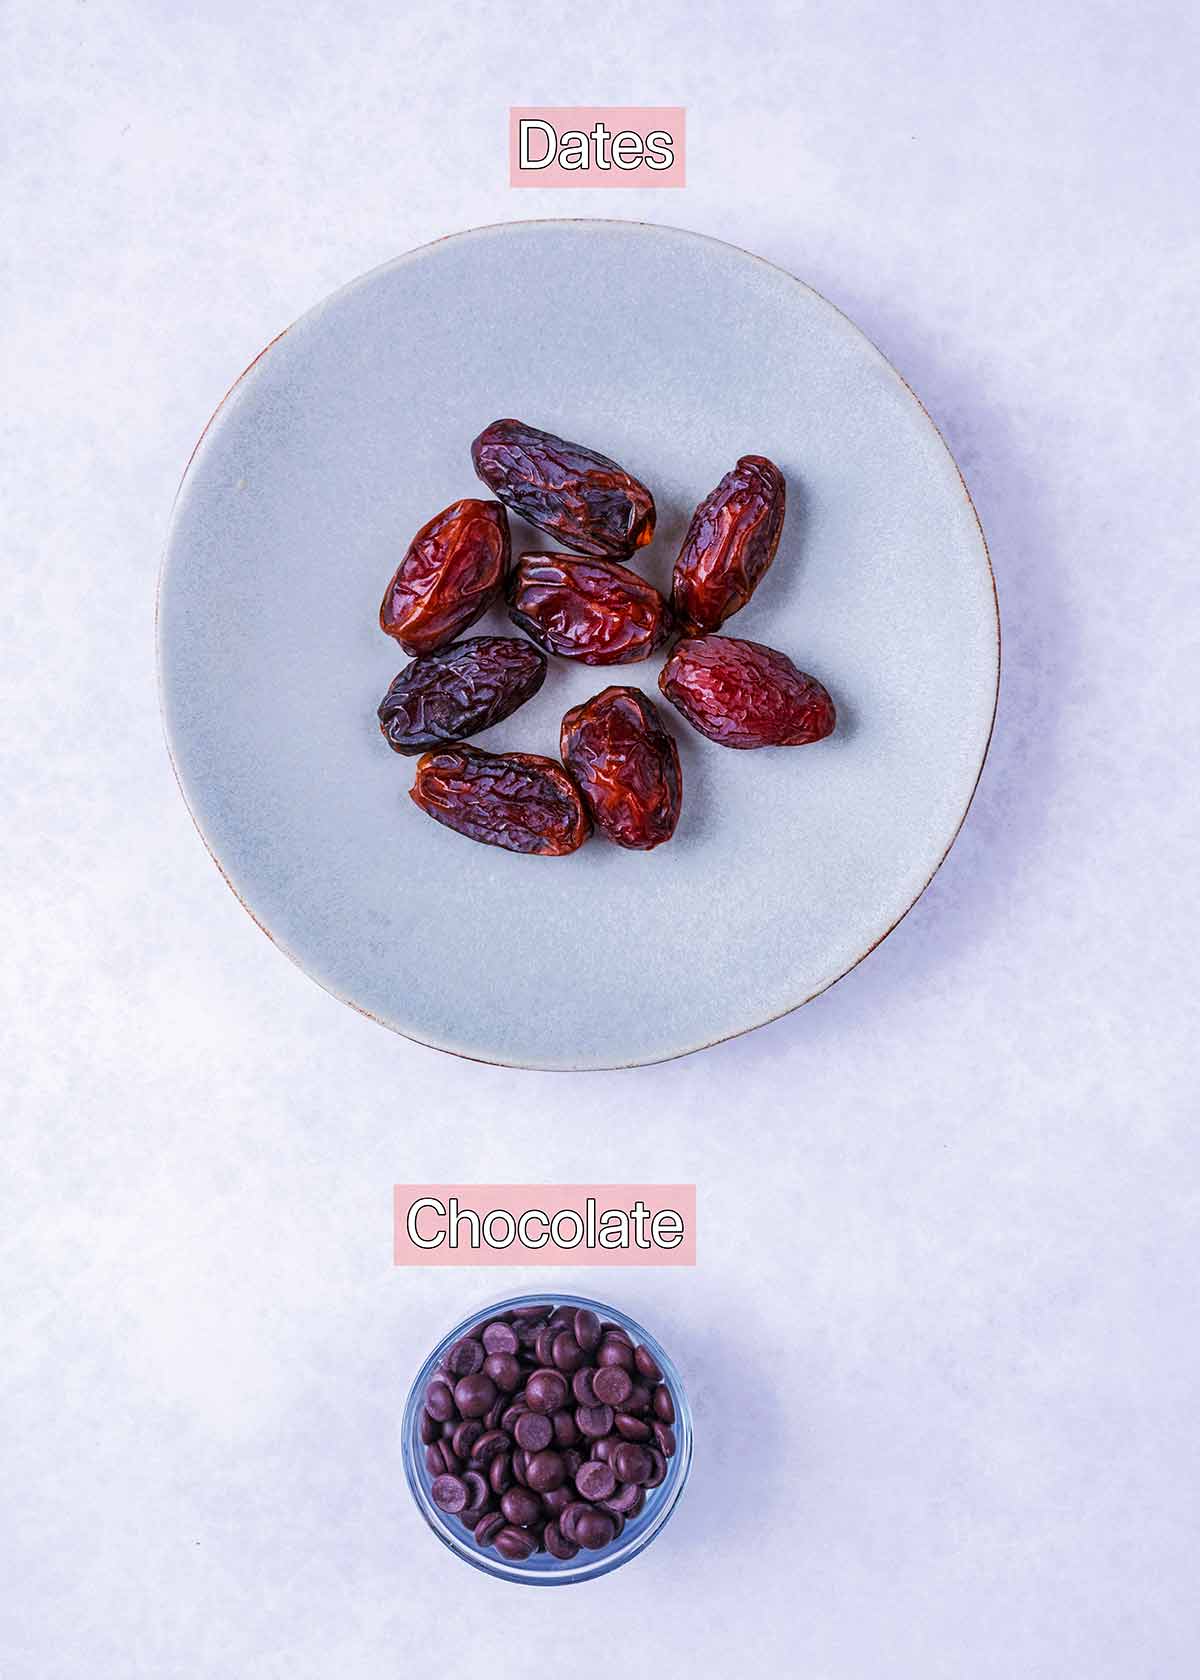 A plate of dates and a small bowl of chocolate chips, both are labelled.